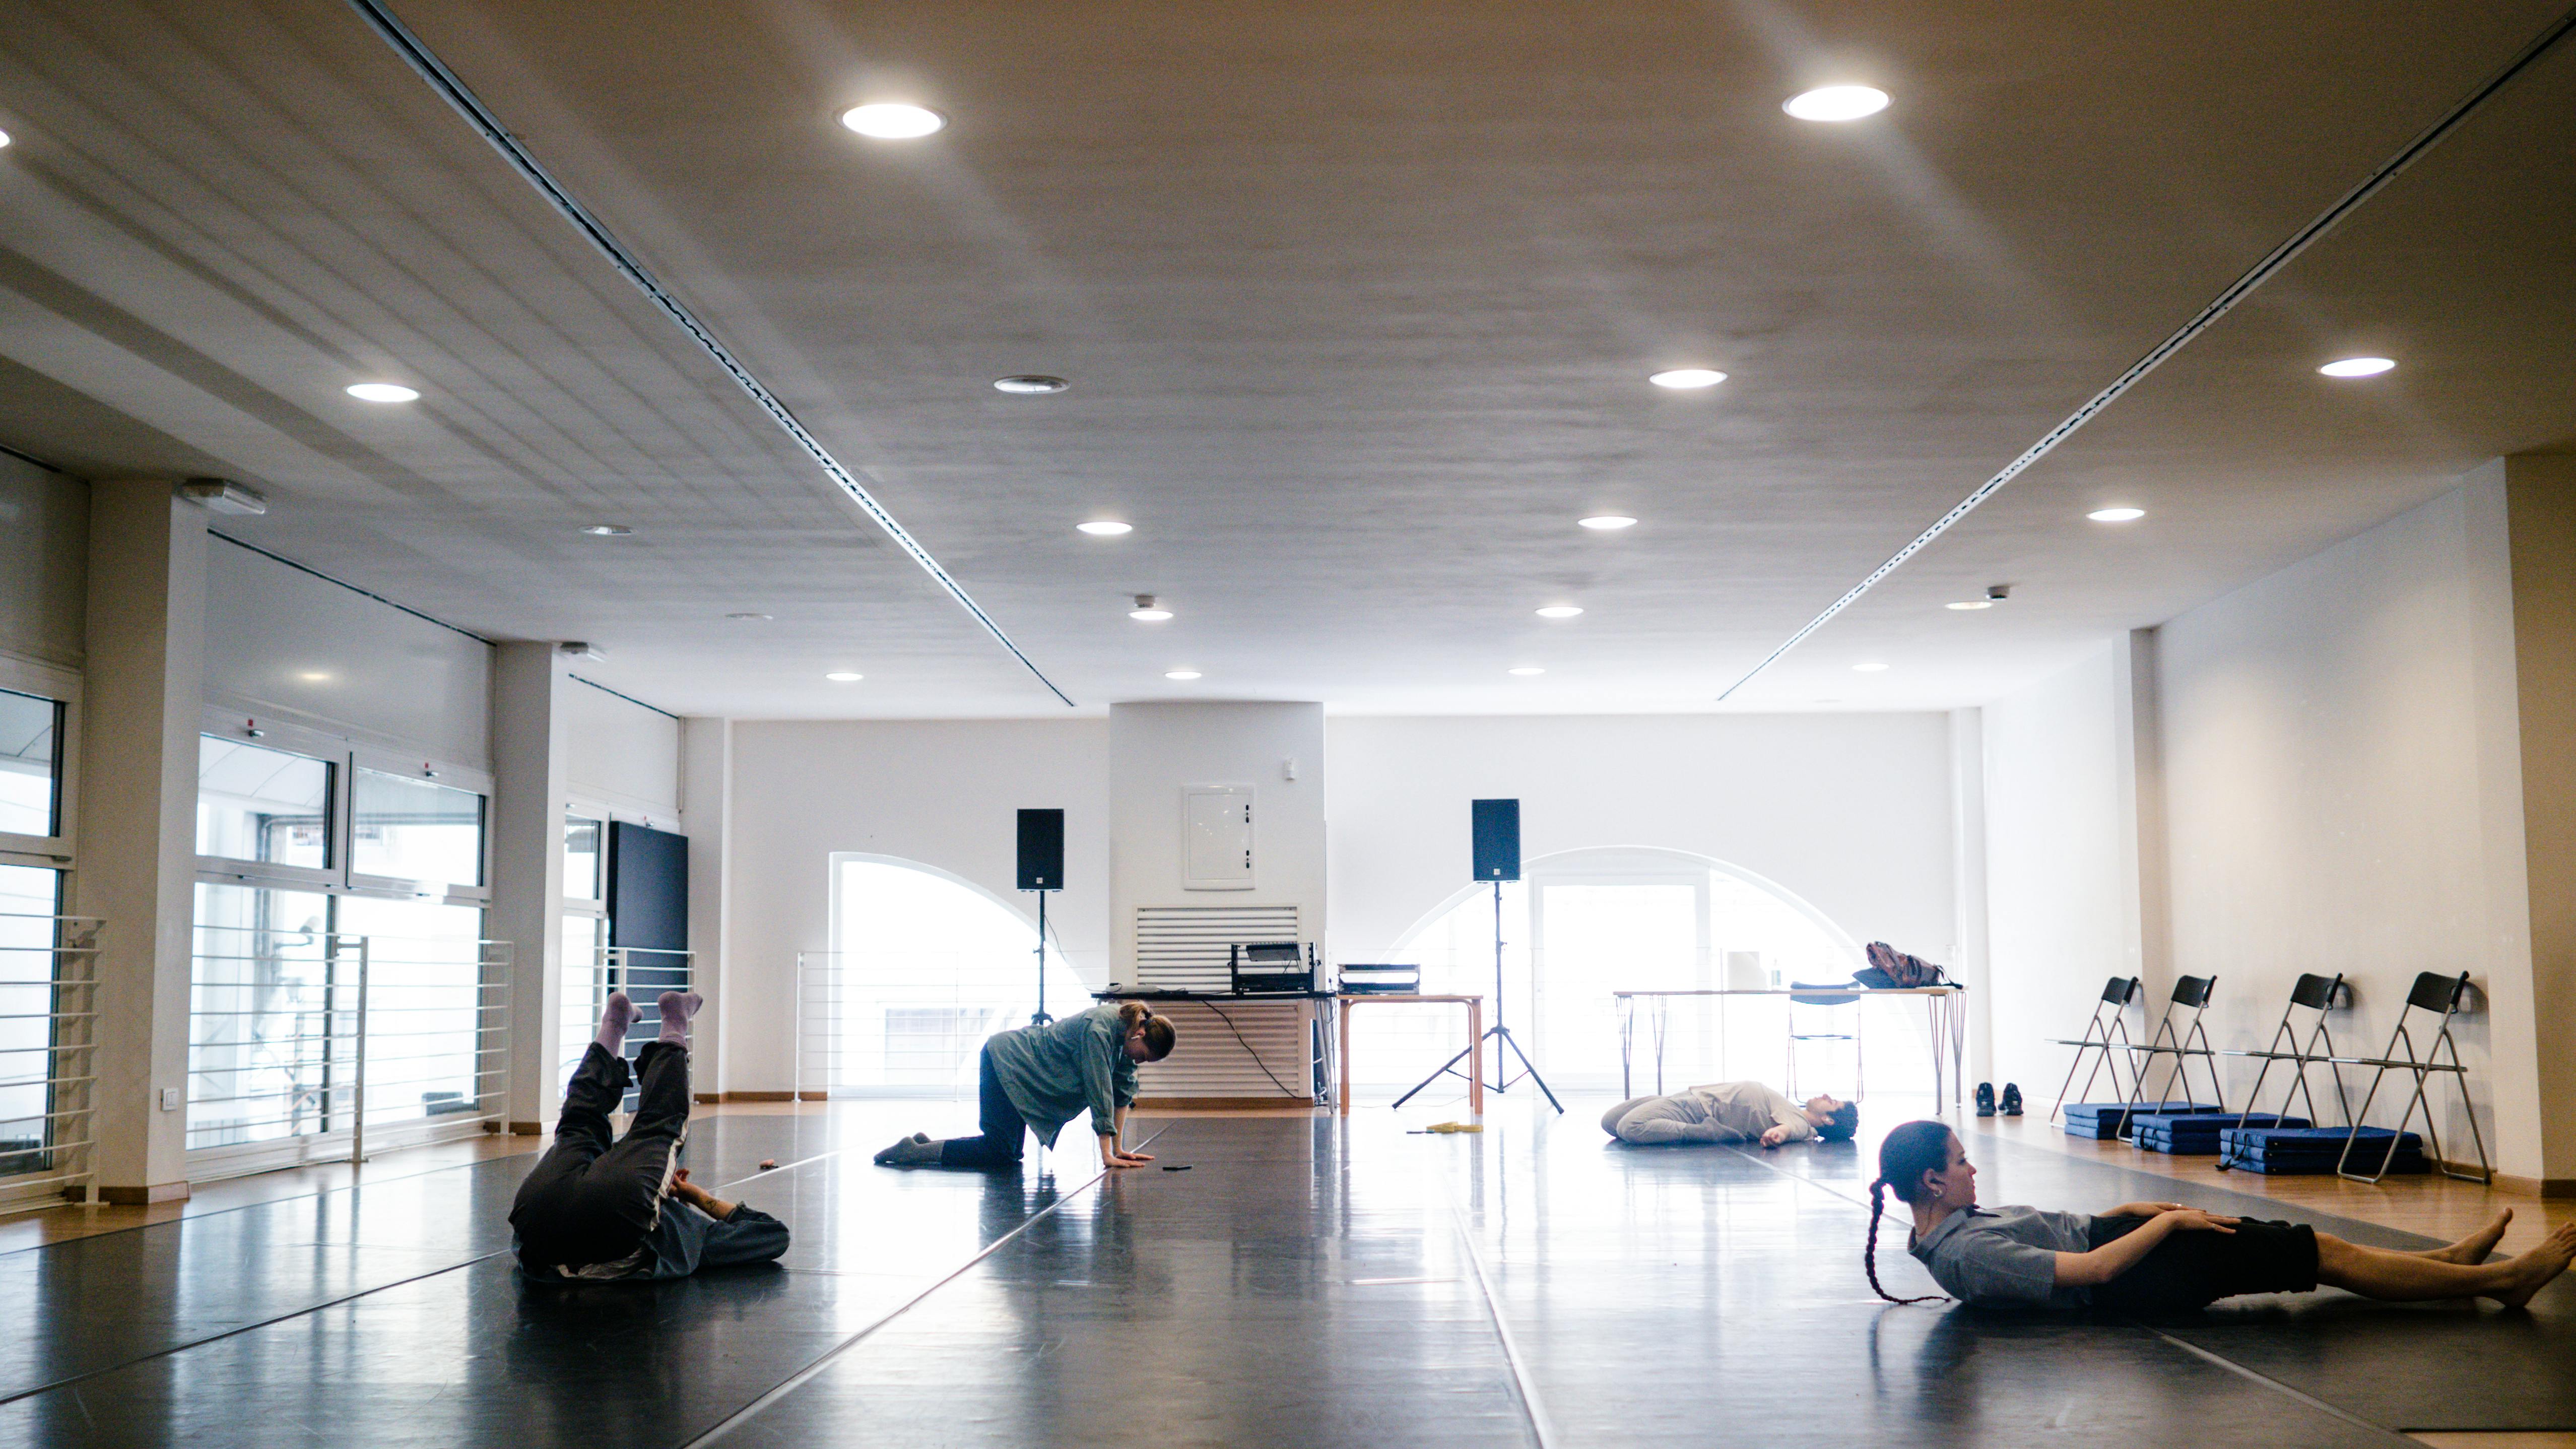 Four performers, two girls and two boys, in the hall, warming up and stretching all in contact with the floor